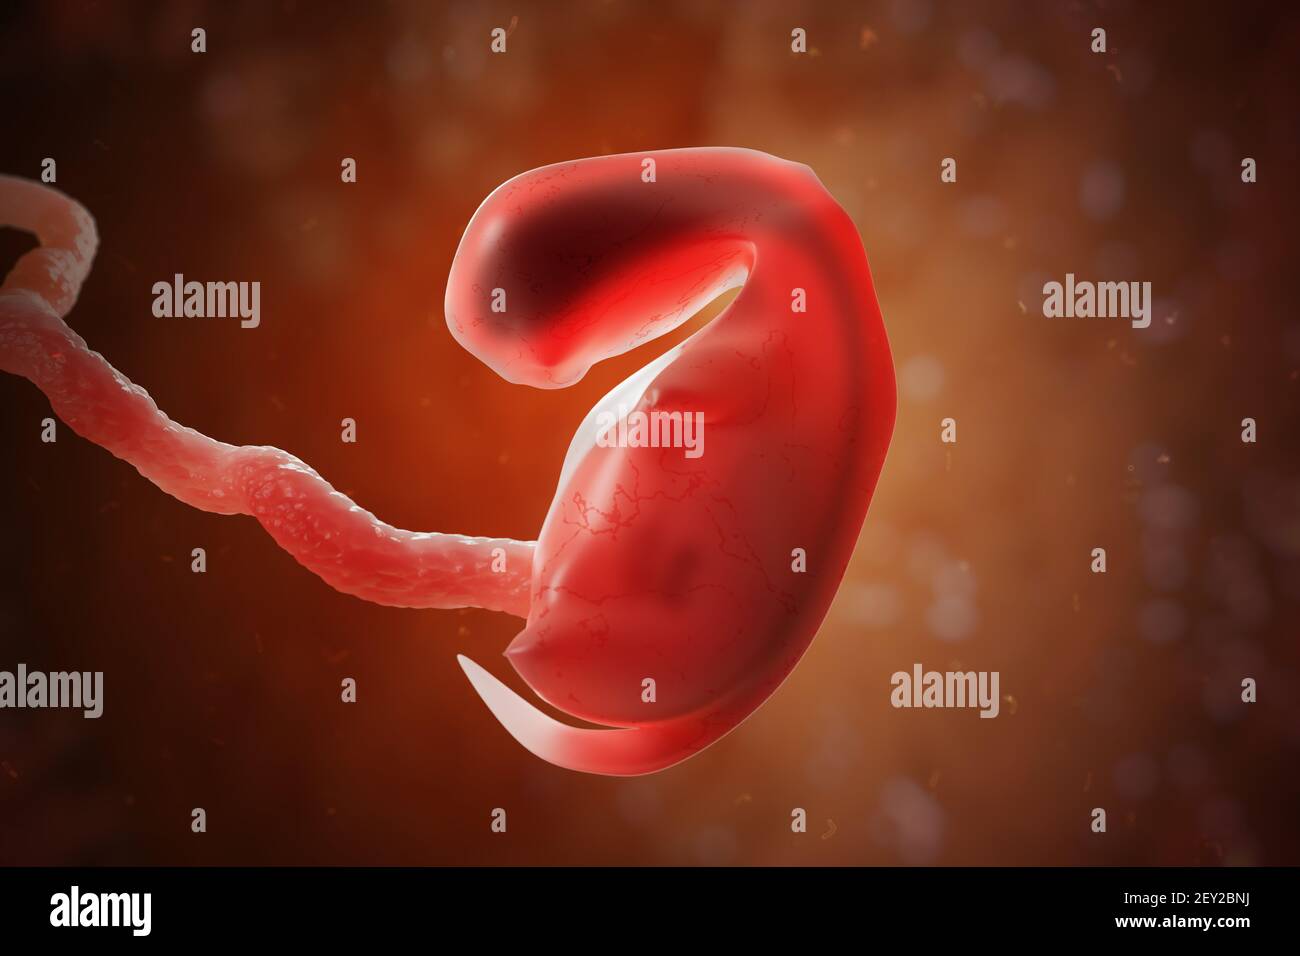 Human embryo or fetus inside womb. 3D rendered illustration. Stock Photo